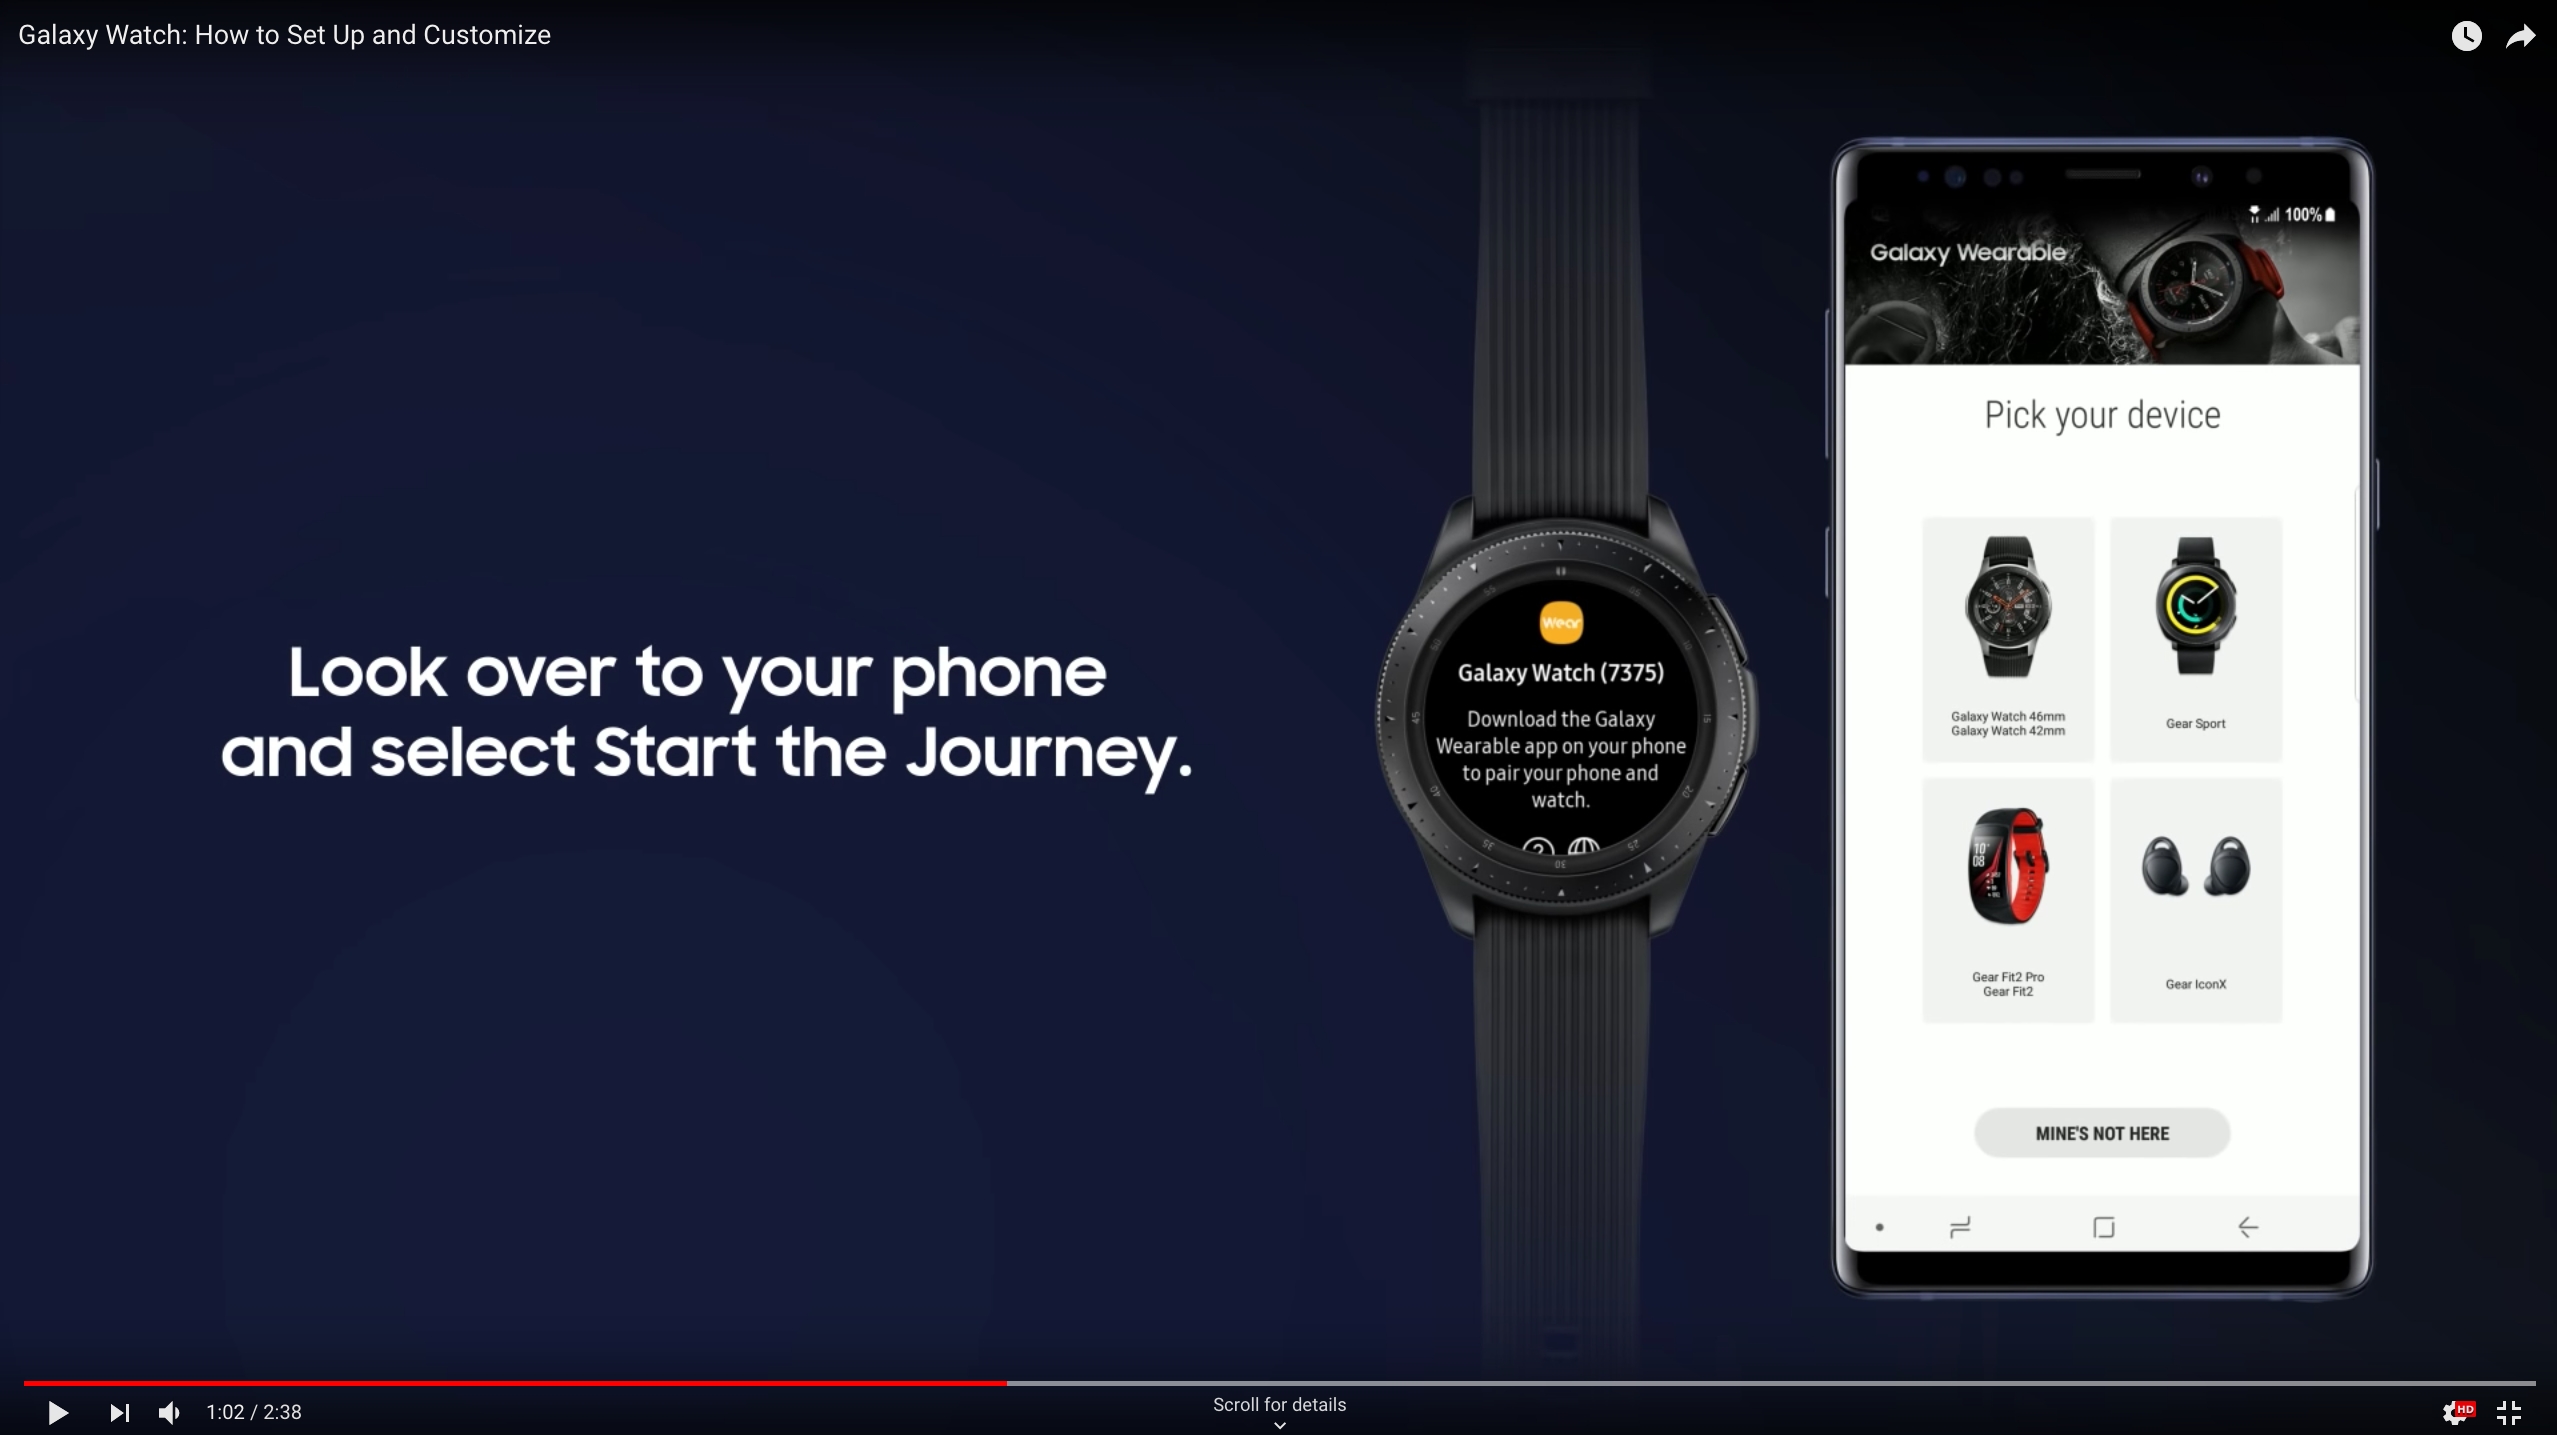 How-to video of Galaxy Watch set up and customization